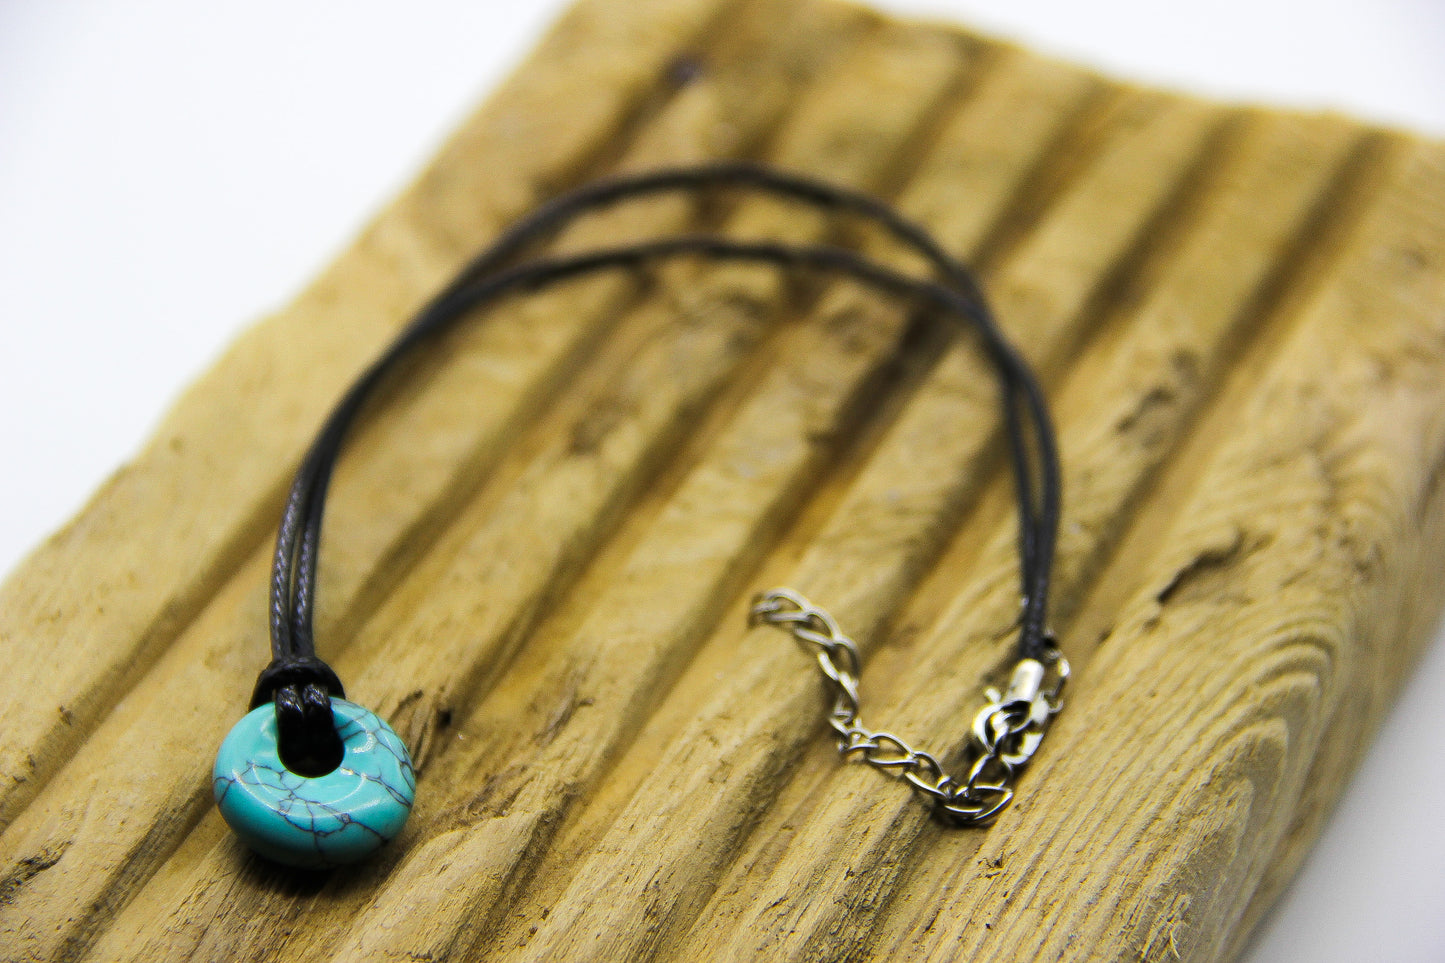 Turquoise pendant on a black cord necklace. 